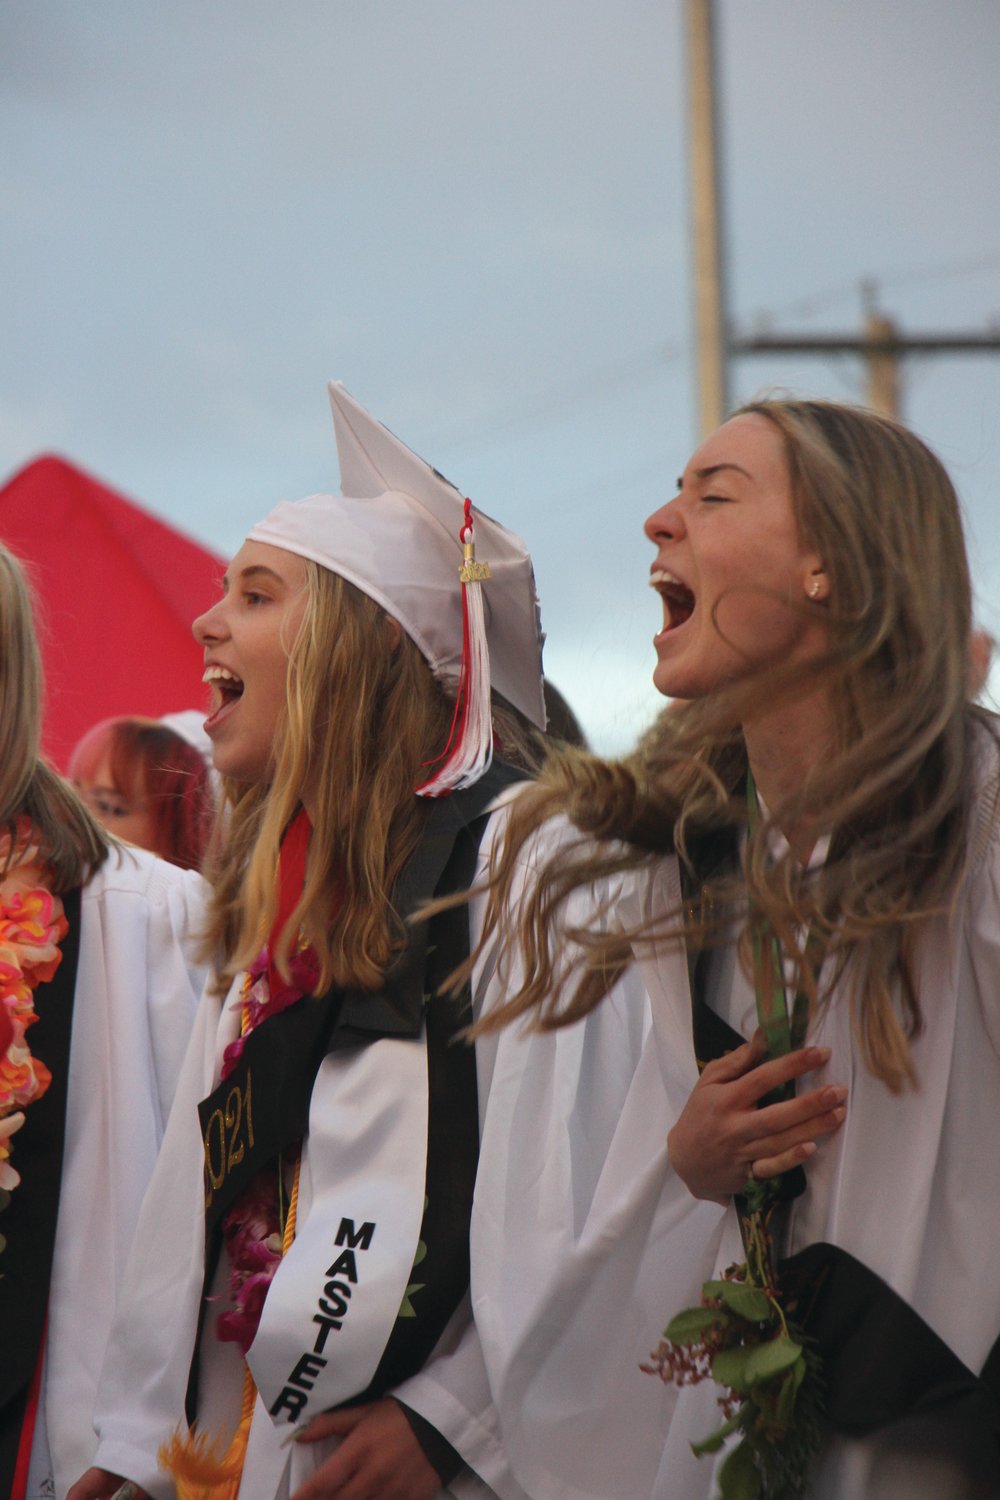 Graduates sing the alma mater with enthusiasm at the close of the ceremony.